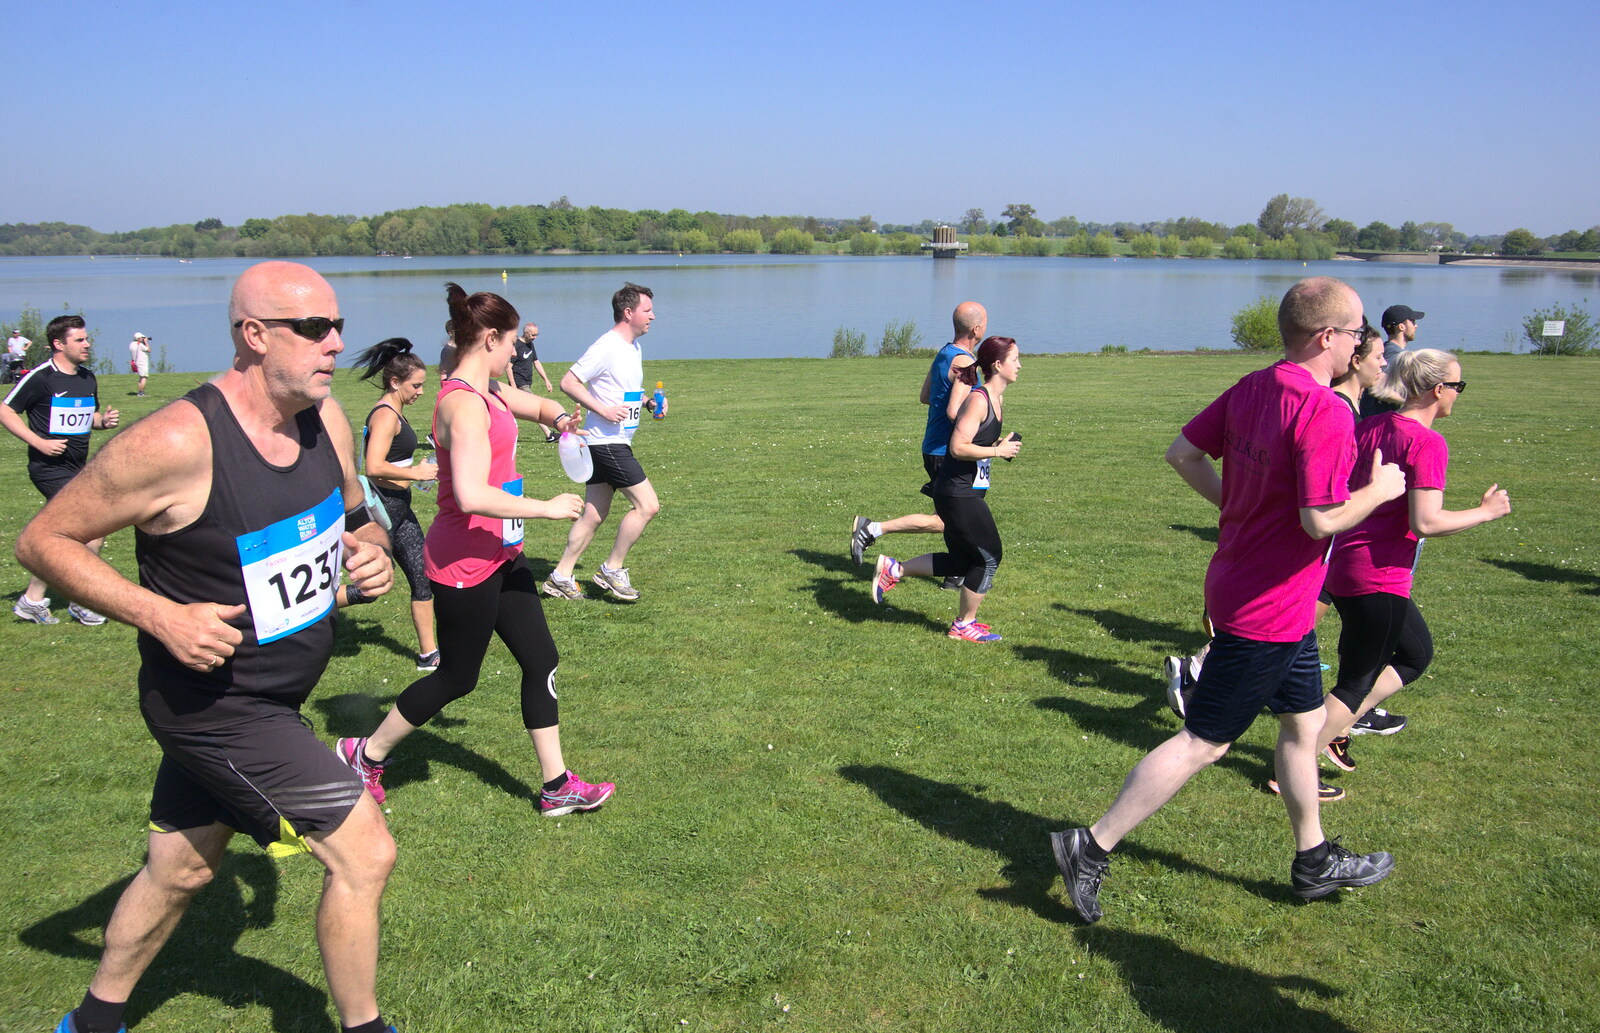 Runners and the Alton Resevoir from Isobel's 10km Run, Alton Water, Stutton, Suffolk - 6th May 2018